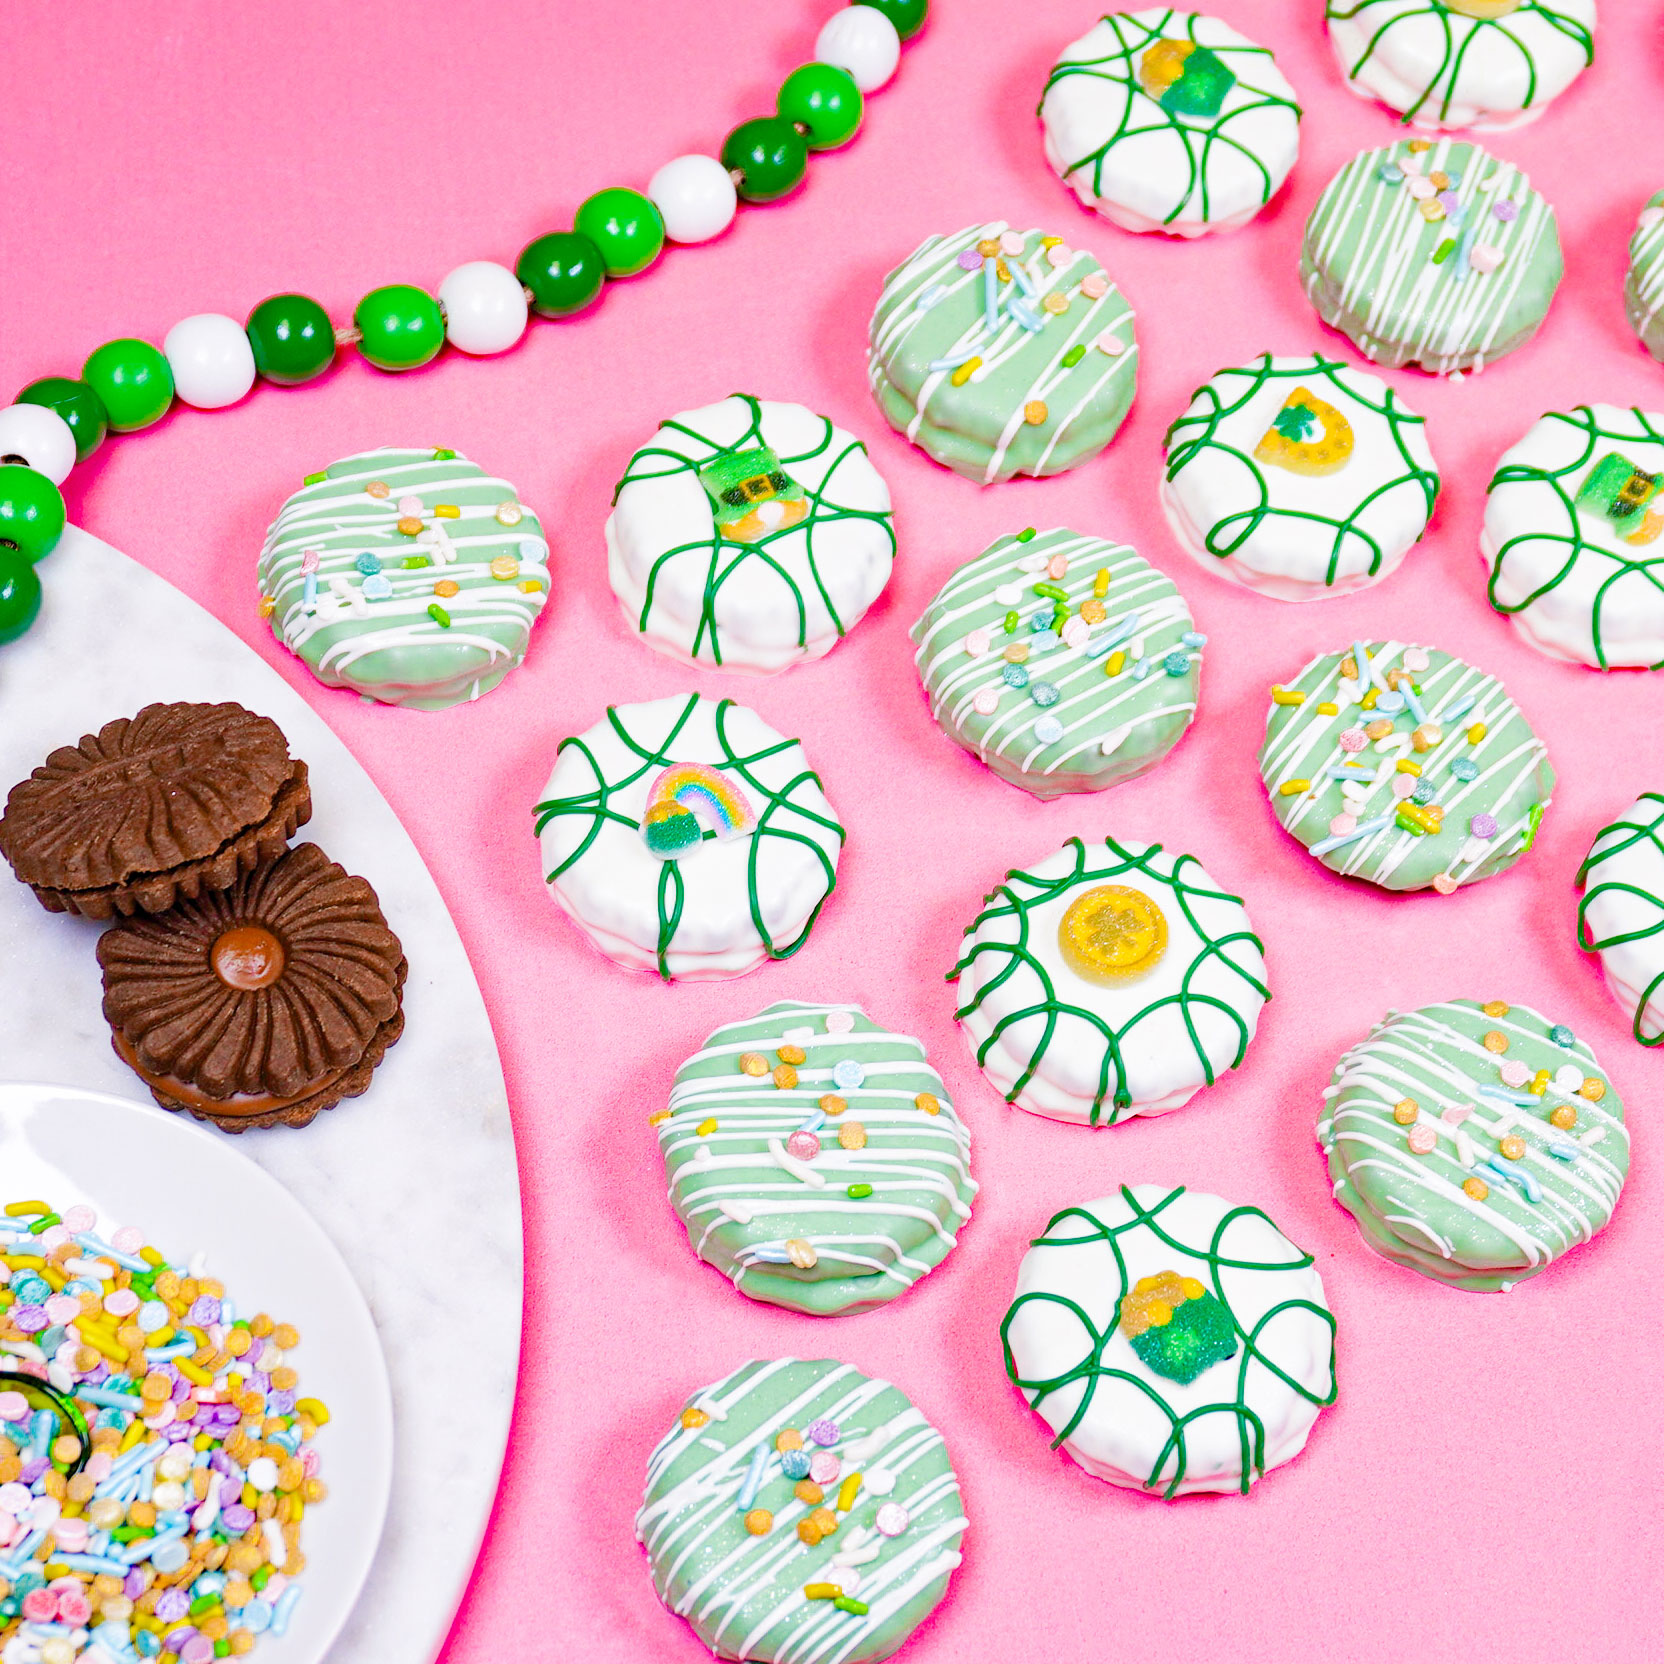 chocolate dipped oreos decorated for st patrick's day